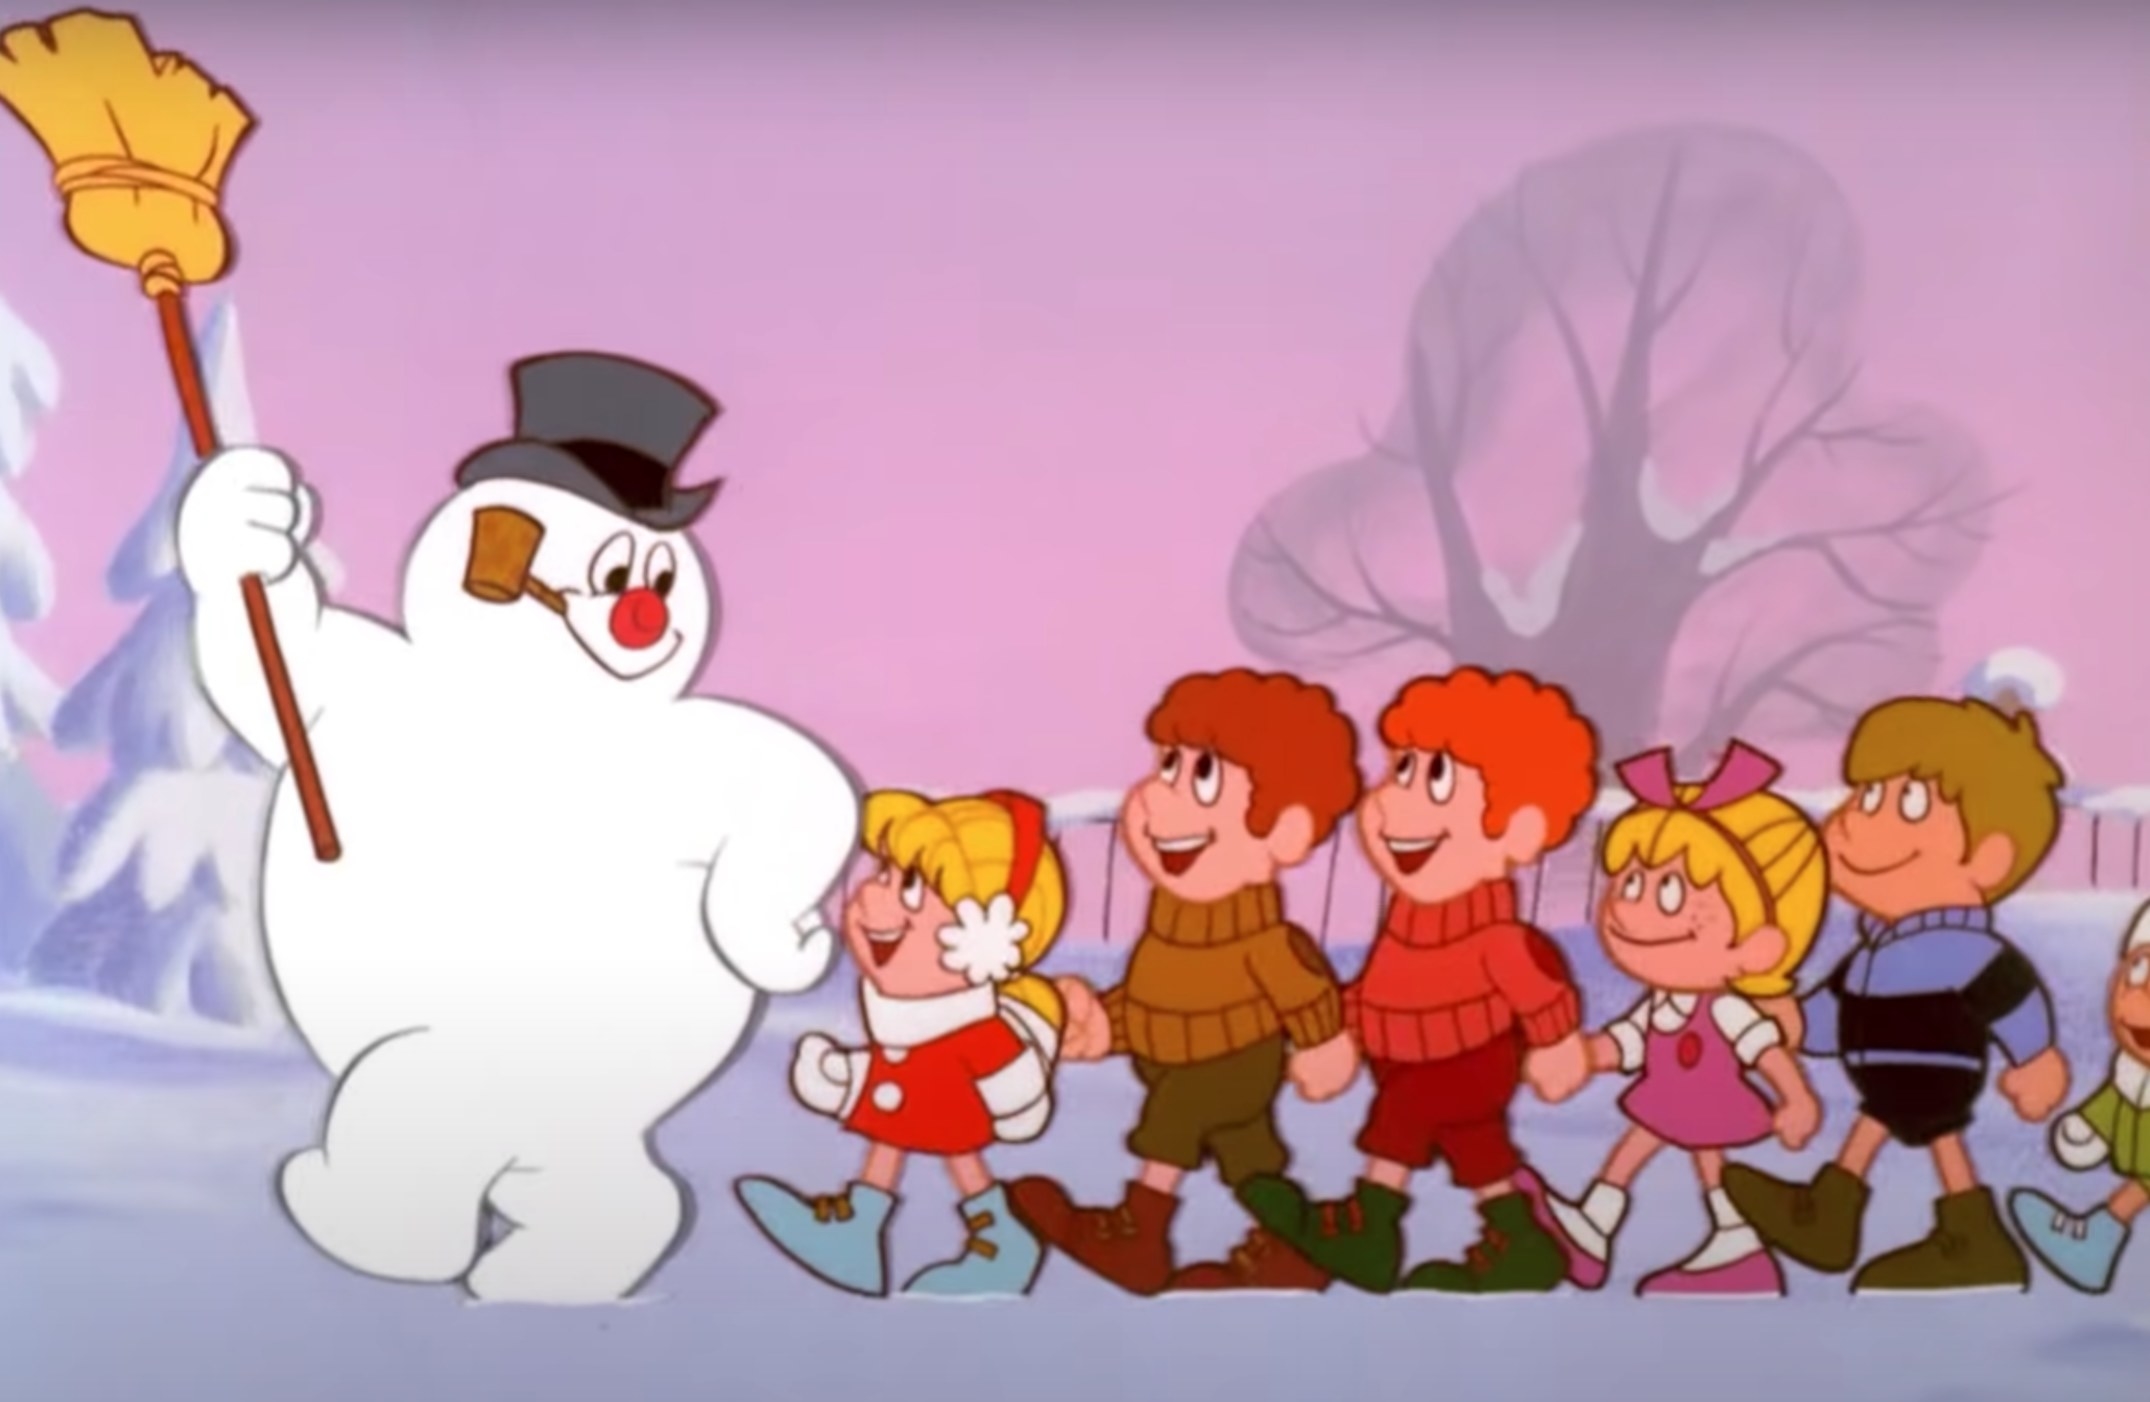 Frosty the snowman meets neighborhood kids after a magical top hat brings him to life